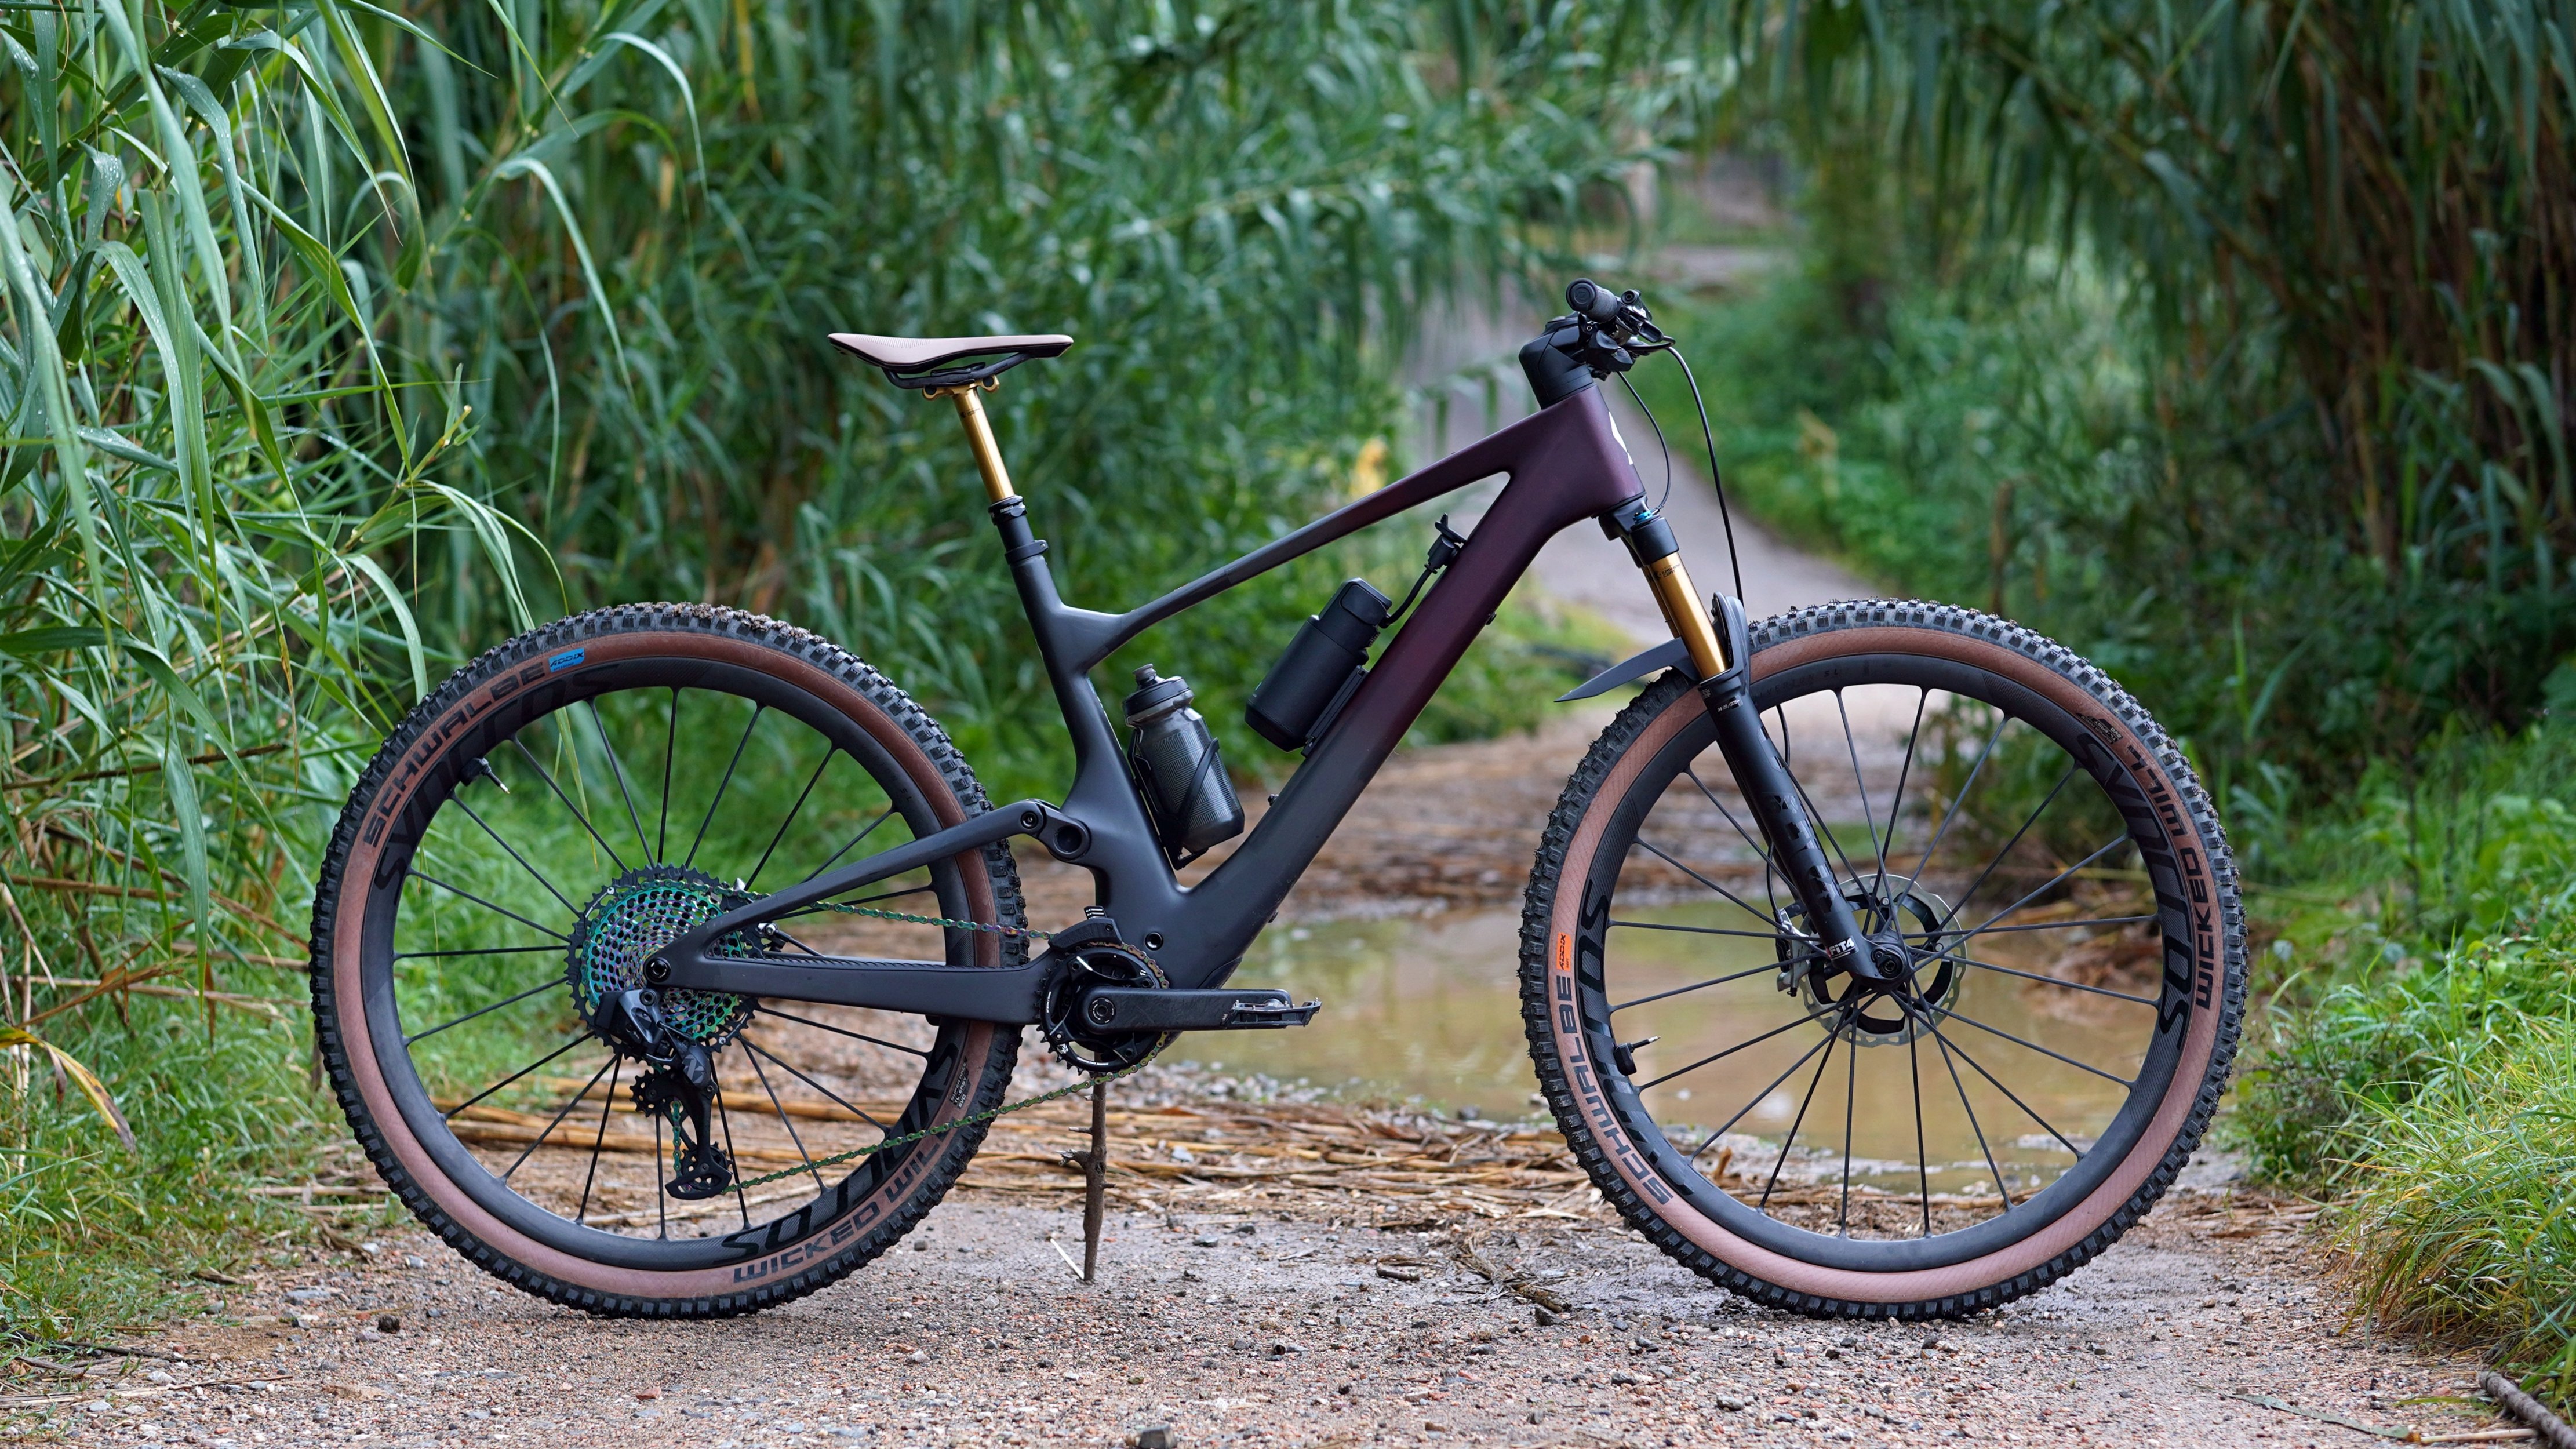 The new Scott Lumen eRide – introduction and testride of a Superlight emtb